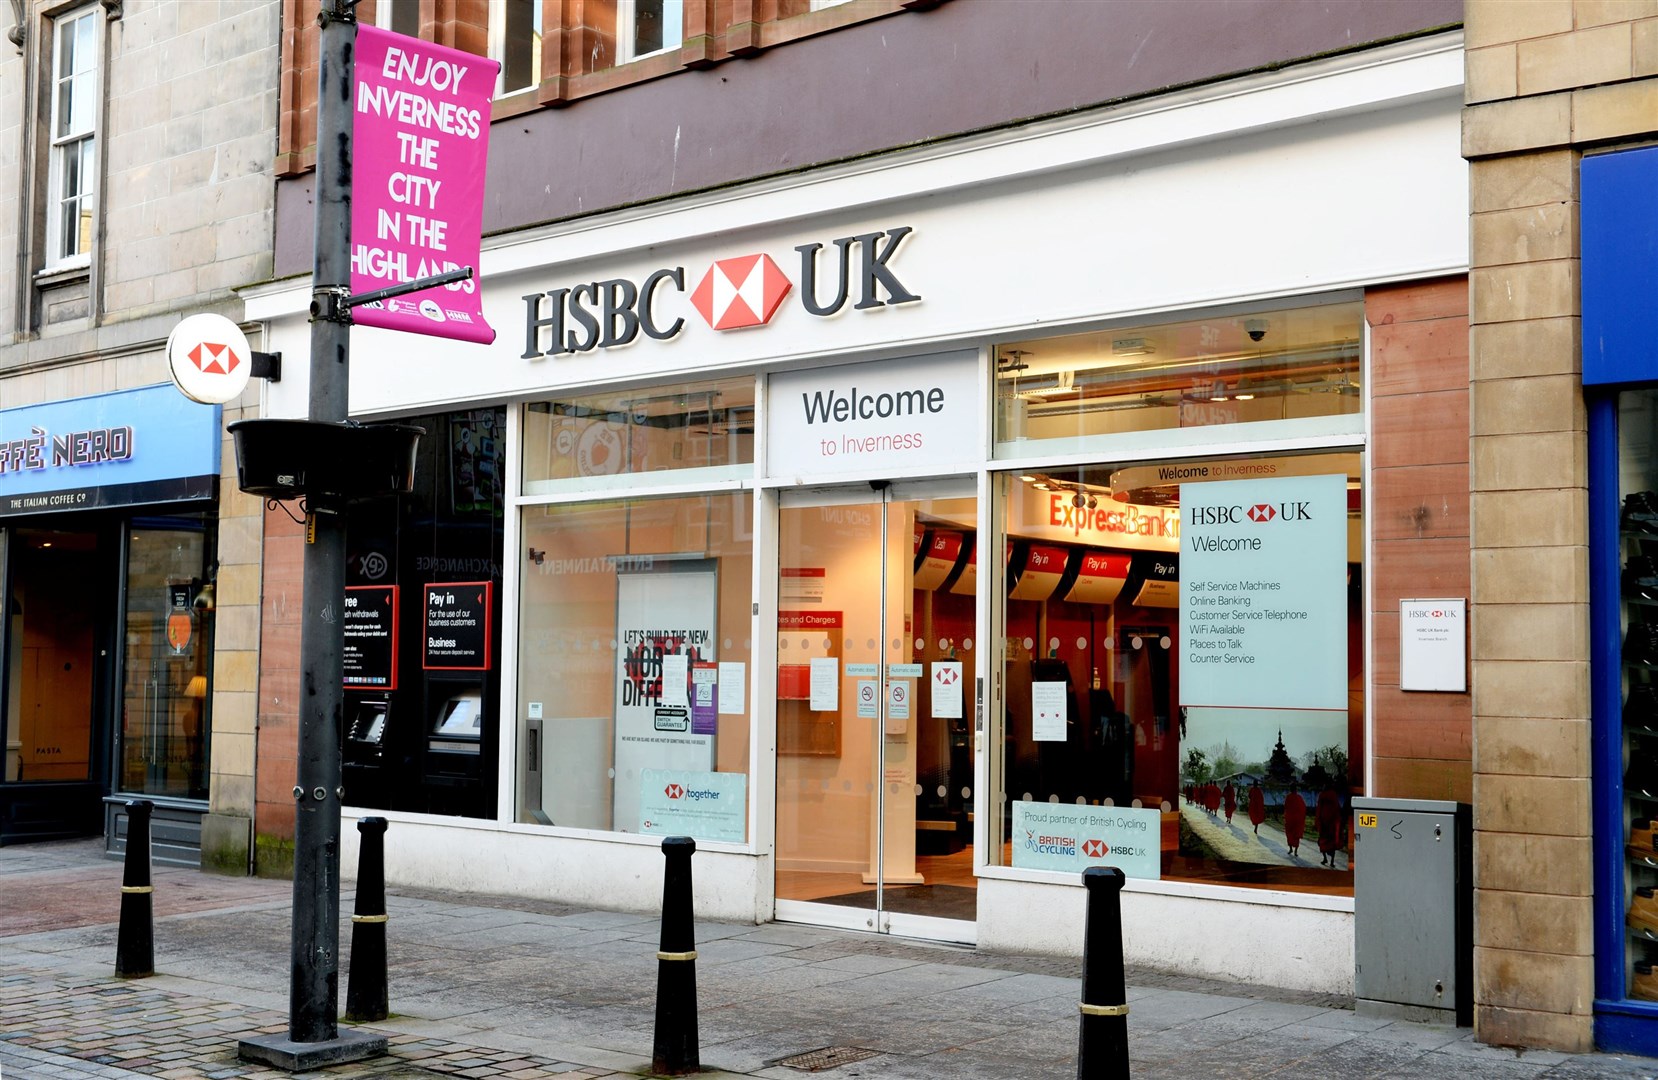 The Inverness High Street branch is HSBC's only branch in the Highland Council area.